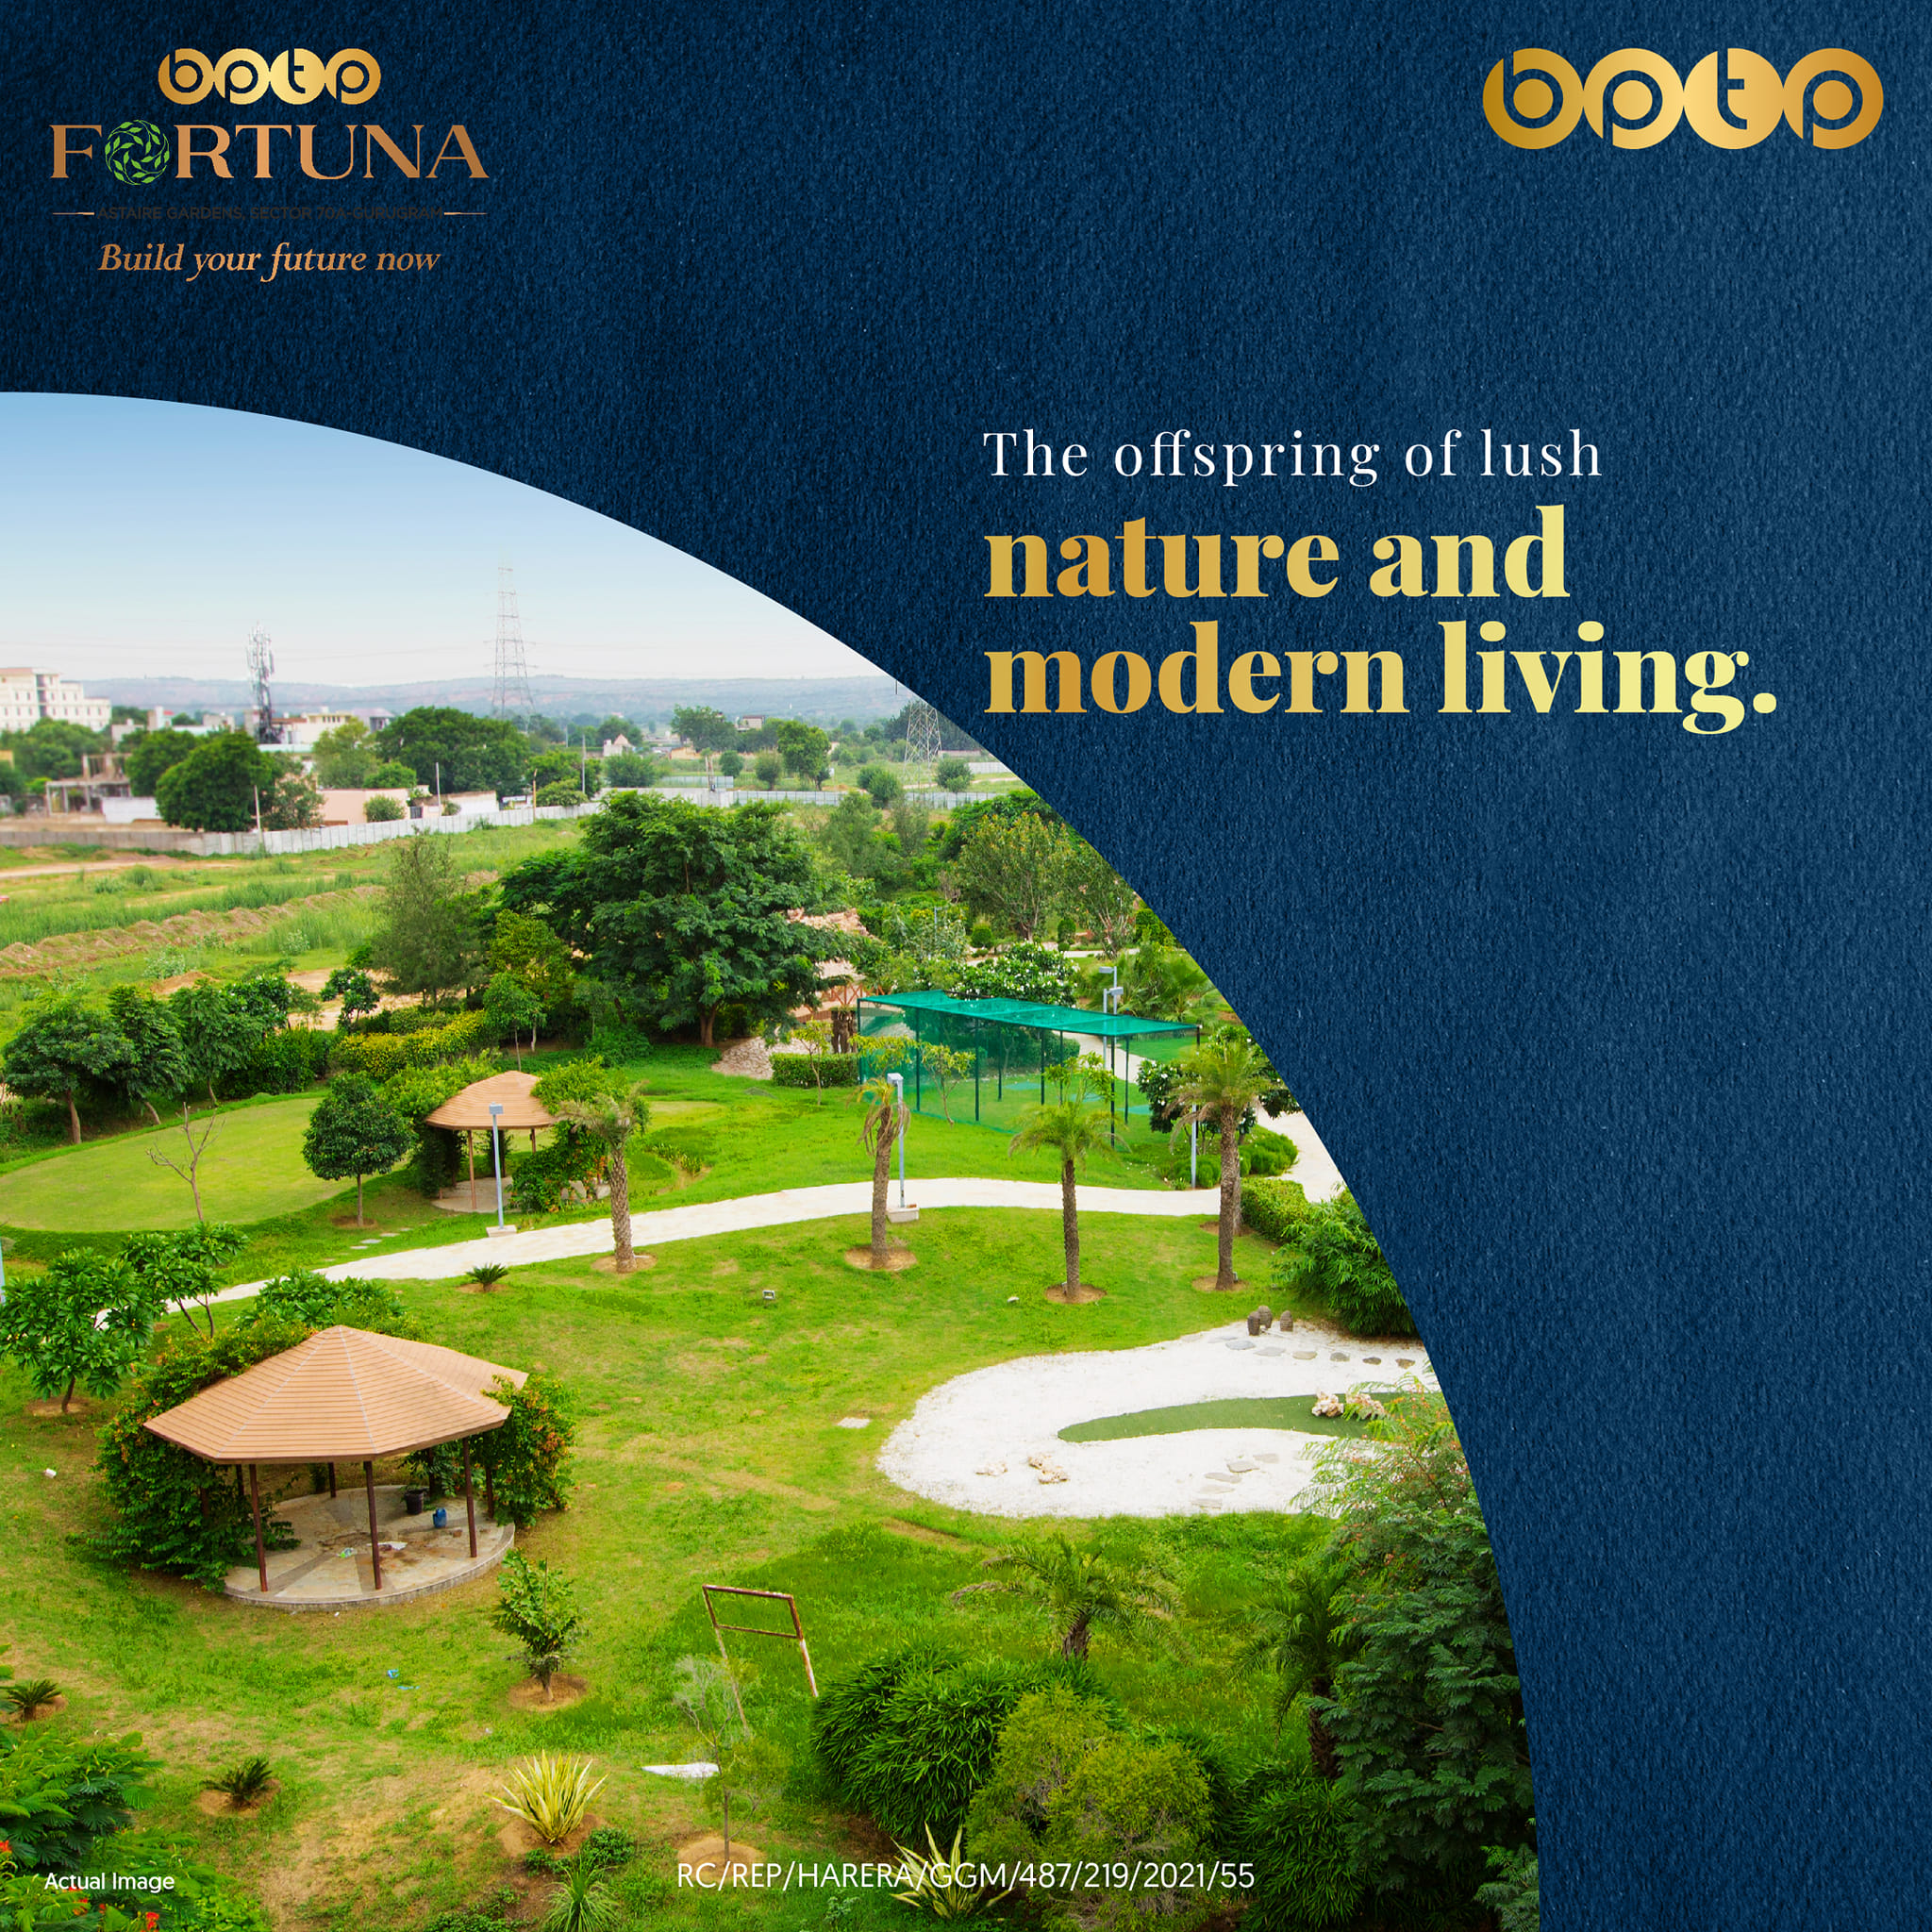 Discover a serene oasis amidst modern living with BPTP Fortuna, Gurgaon Update